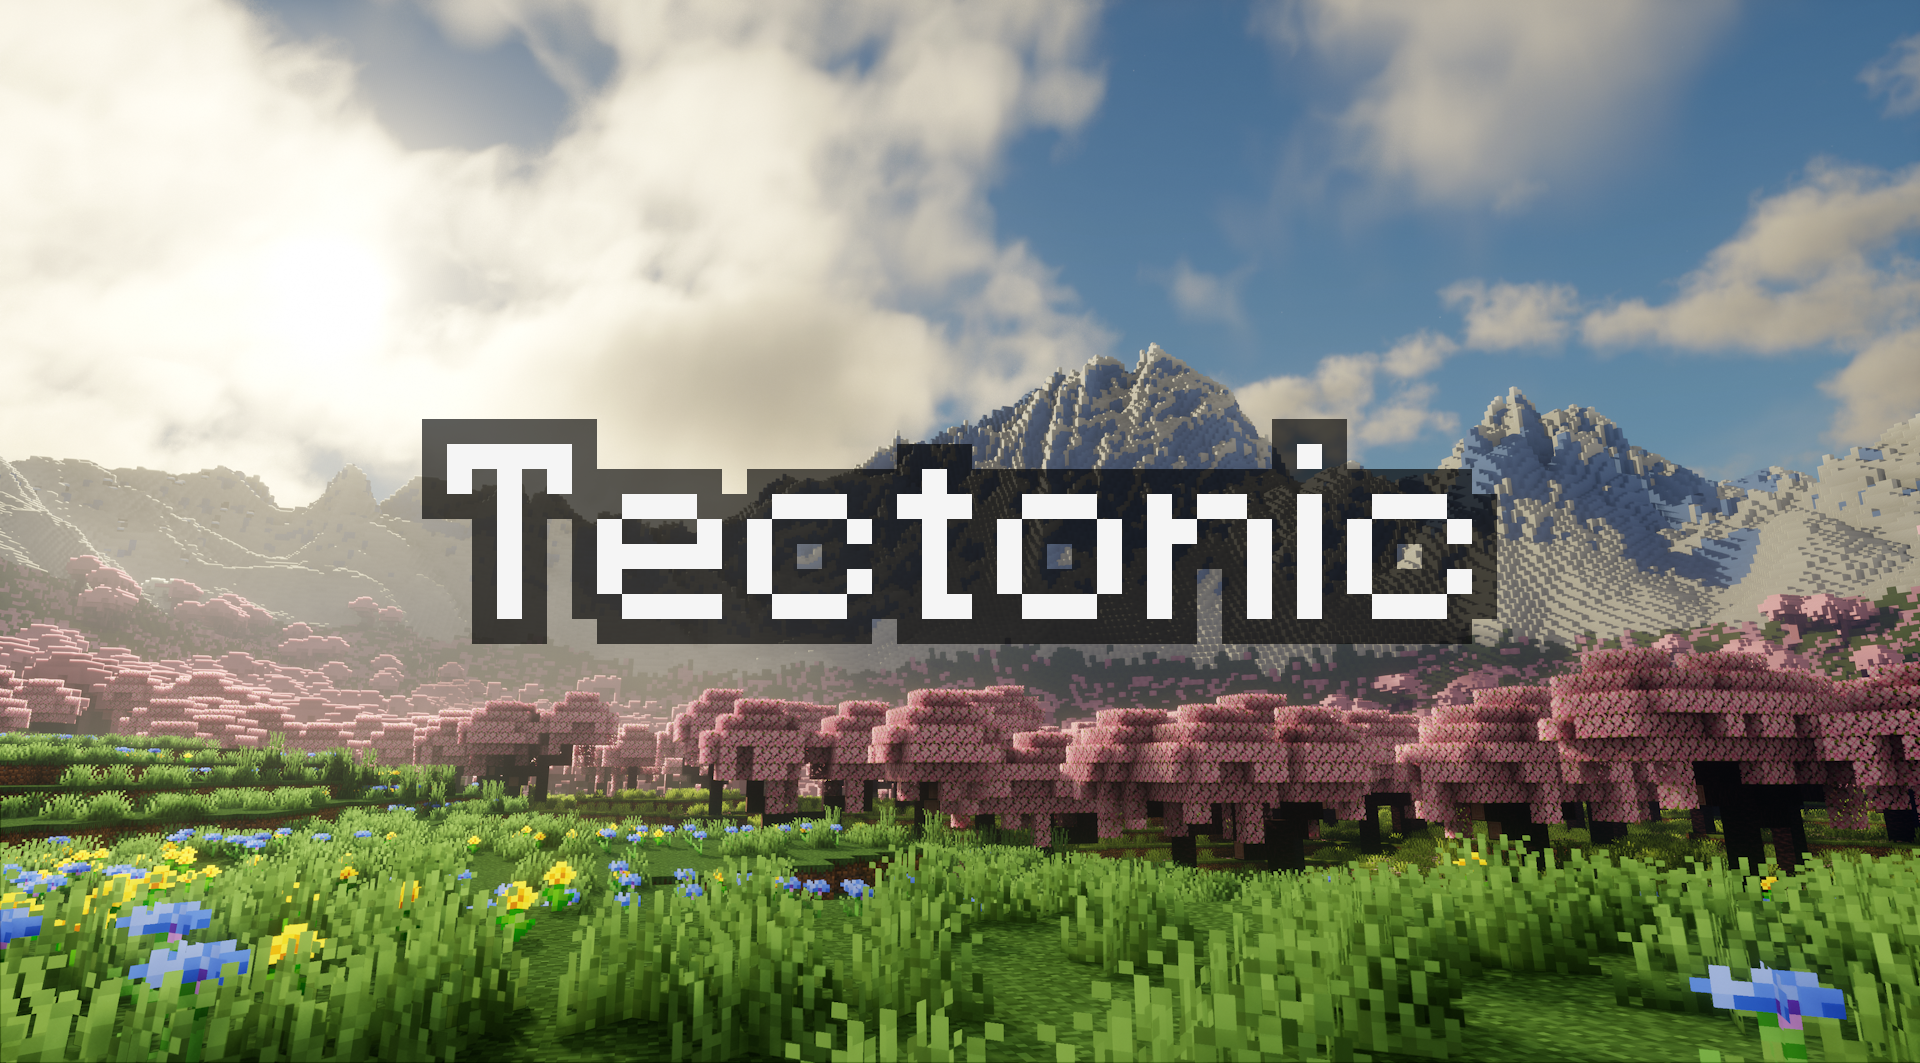 Tectonic title text with a cherry grove and massive mountain range in the background